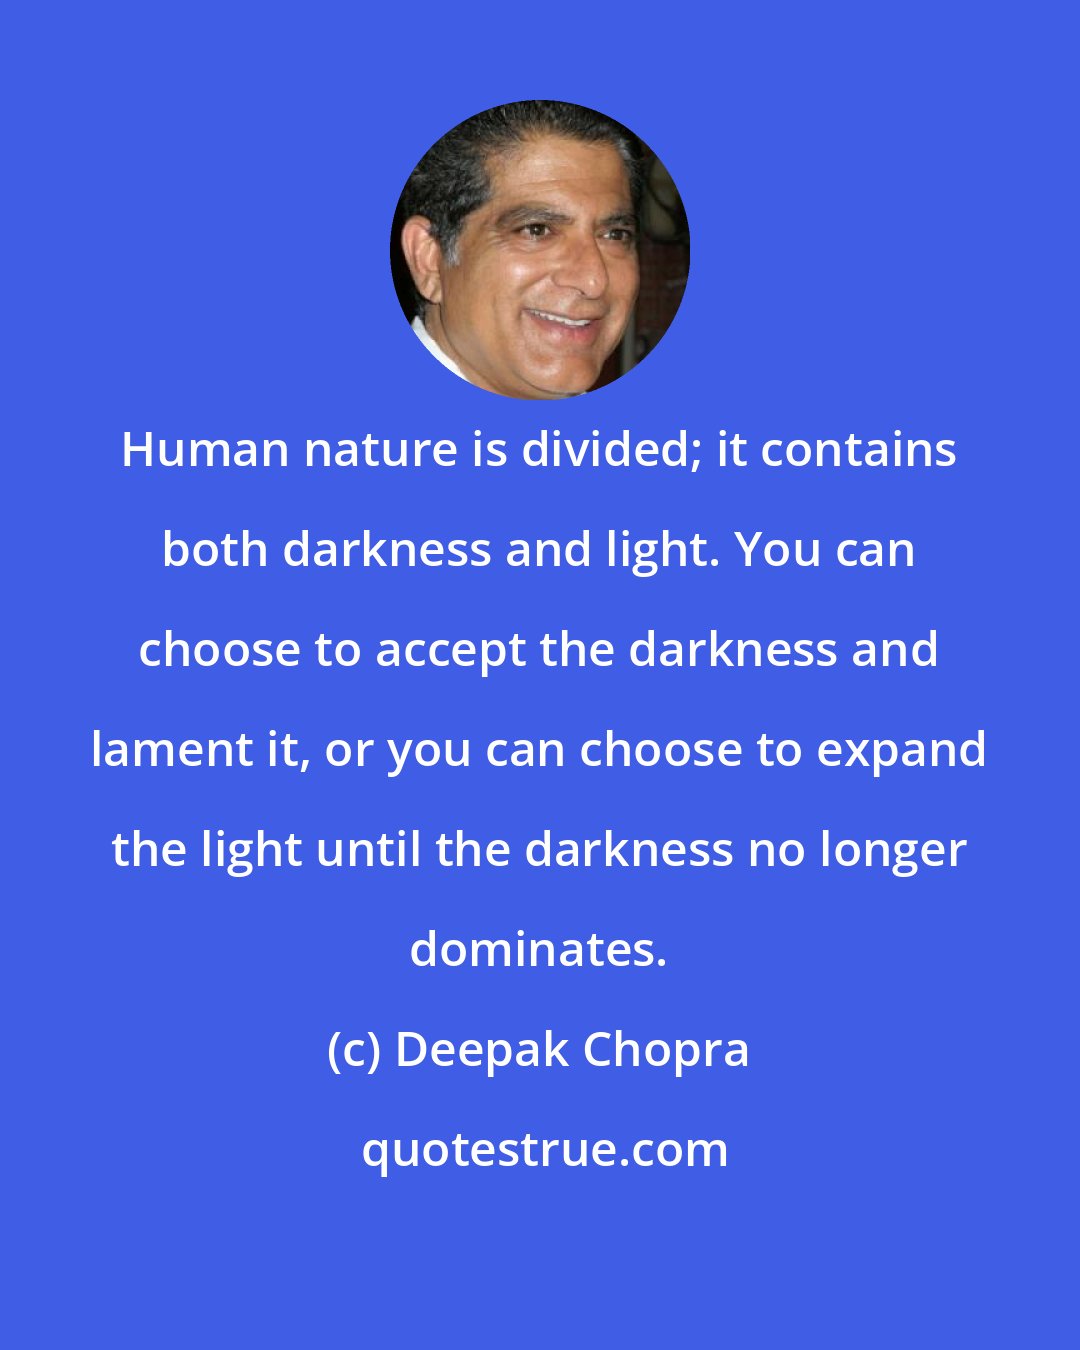 Deepak Chopra: Human nature is divided; it contains both darkness and light. You can choose to accept the darkness and lament it, or you can choose to expand the light until the darkness no longer dominates.